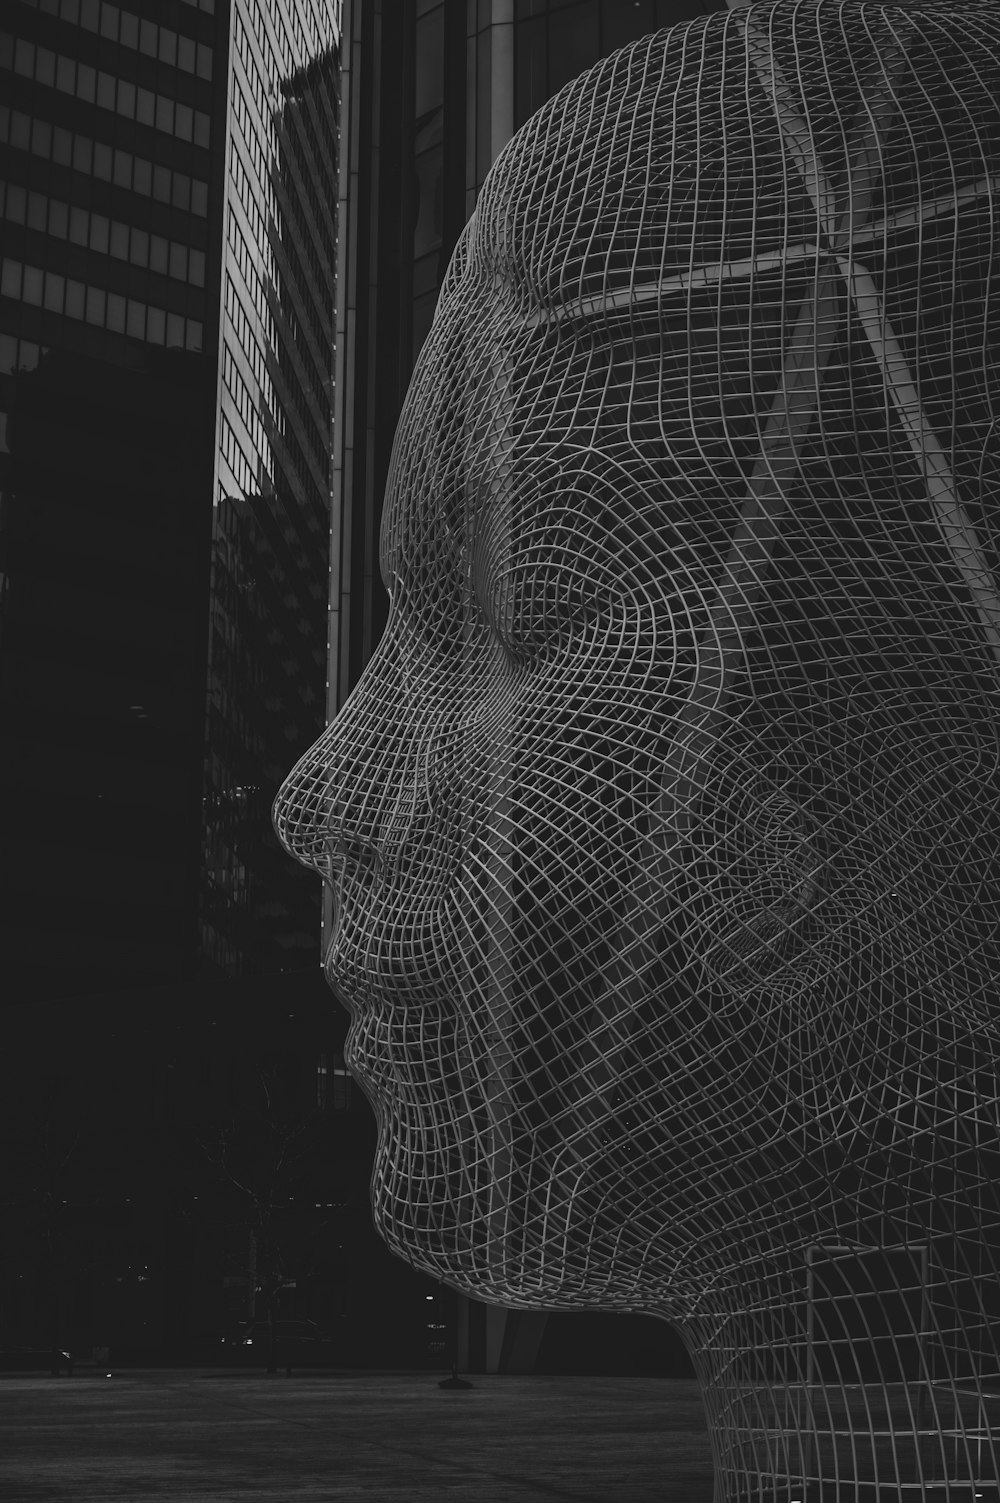 grayscale photo of net with net